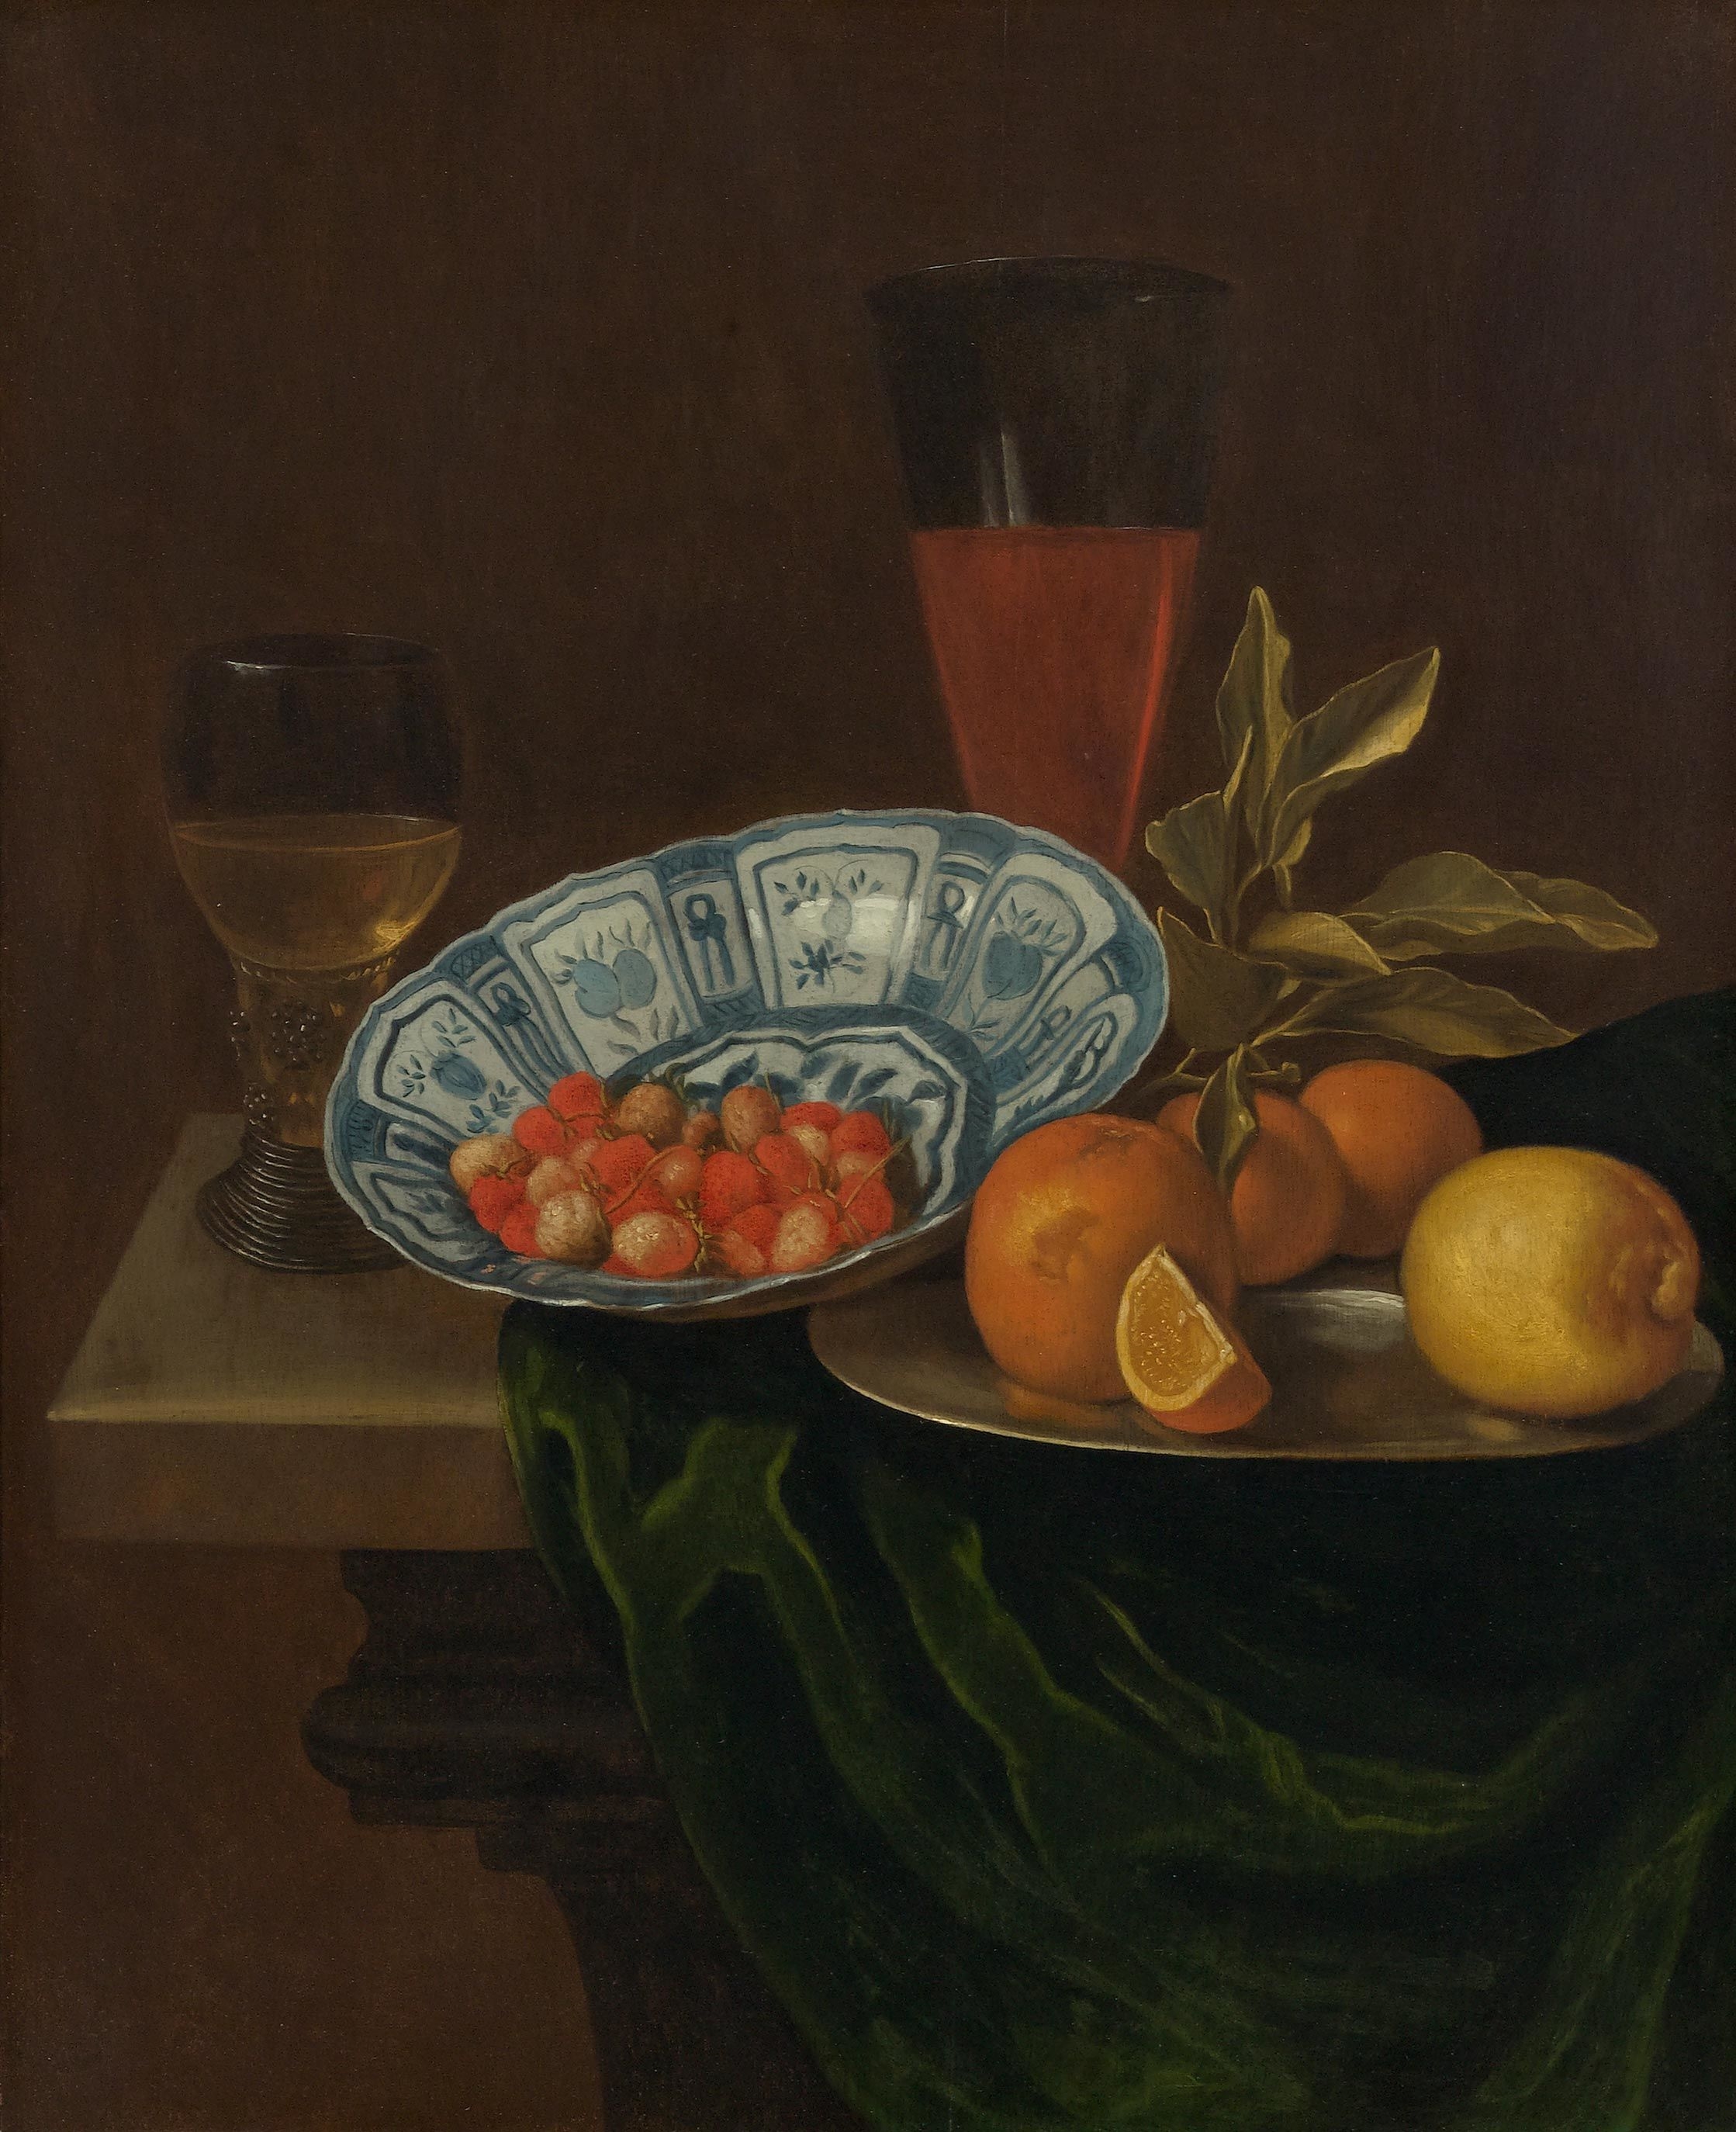 Still life with Delft bowl and citrus fruits by Willem Kalf